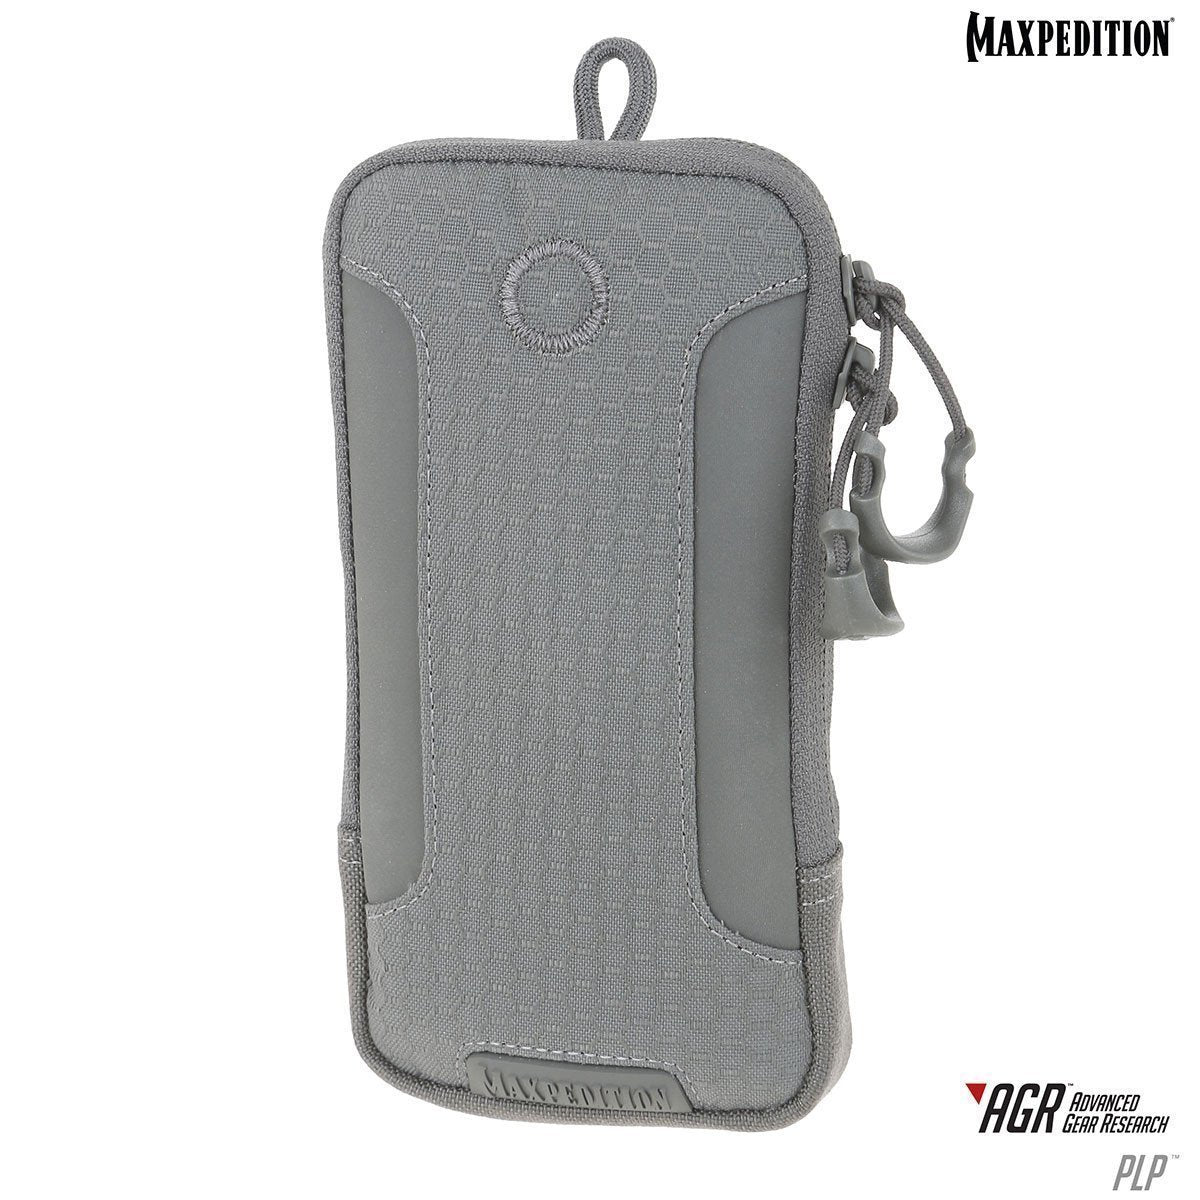 Maxpedition PLP iPhone 6/6S/7 Plus Pouch Accessories Maxpedition Gray Tactical Gear Supplier Tactical Distributors Australia